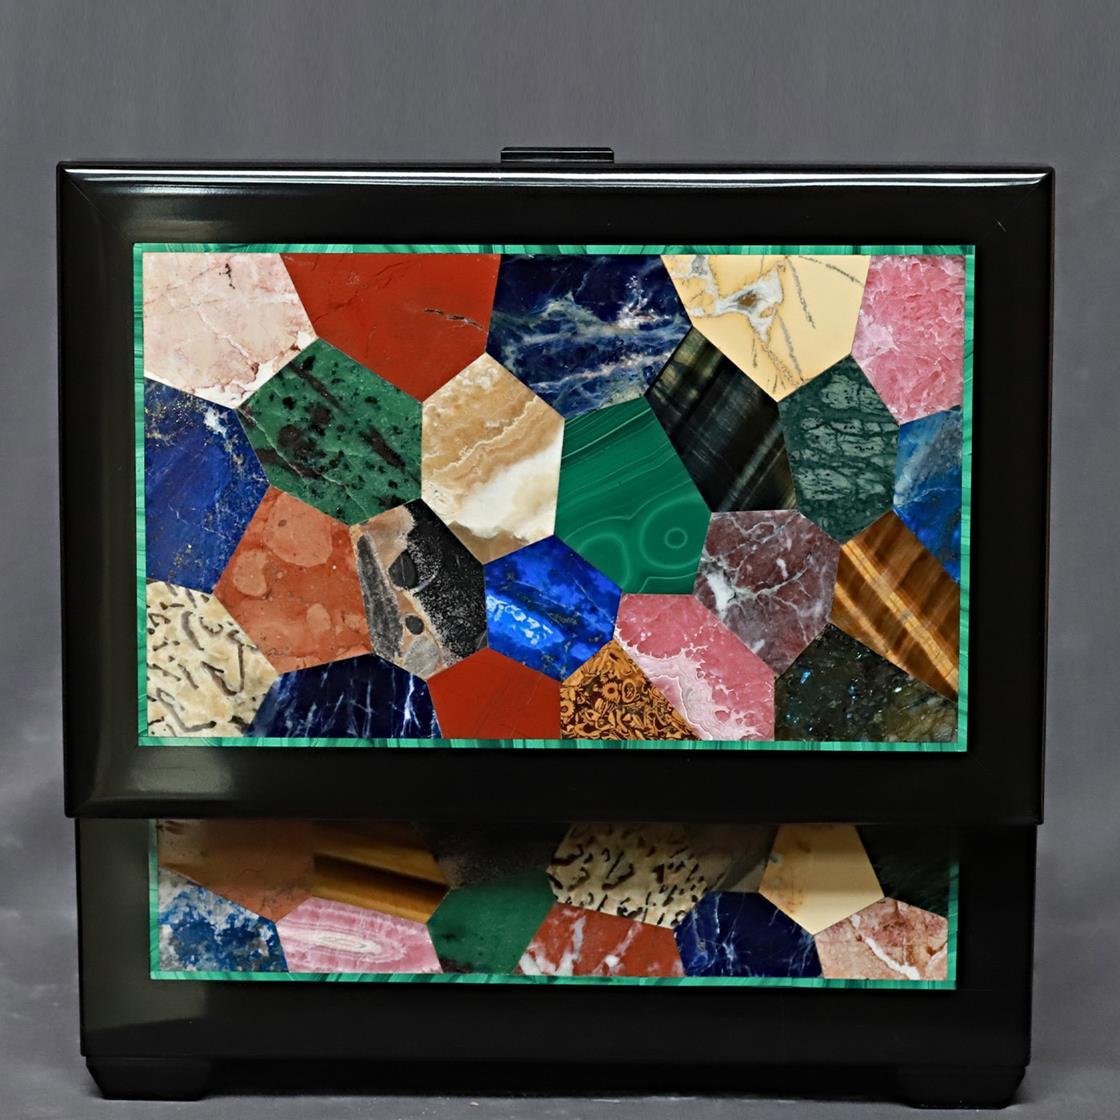 Precious memories impressed on polaroids or jewelry favorites will be luxuriously treasured within this rectangular-cut box. Black Belgio marble is featured to craft its general structure - feet included - while rhodochrosite, tiger eye, lapis